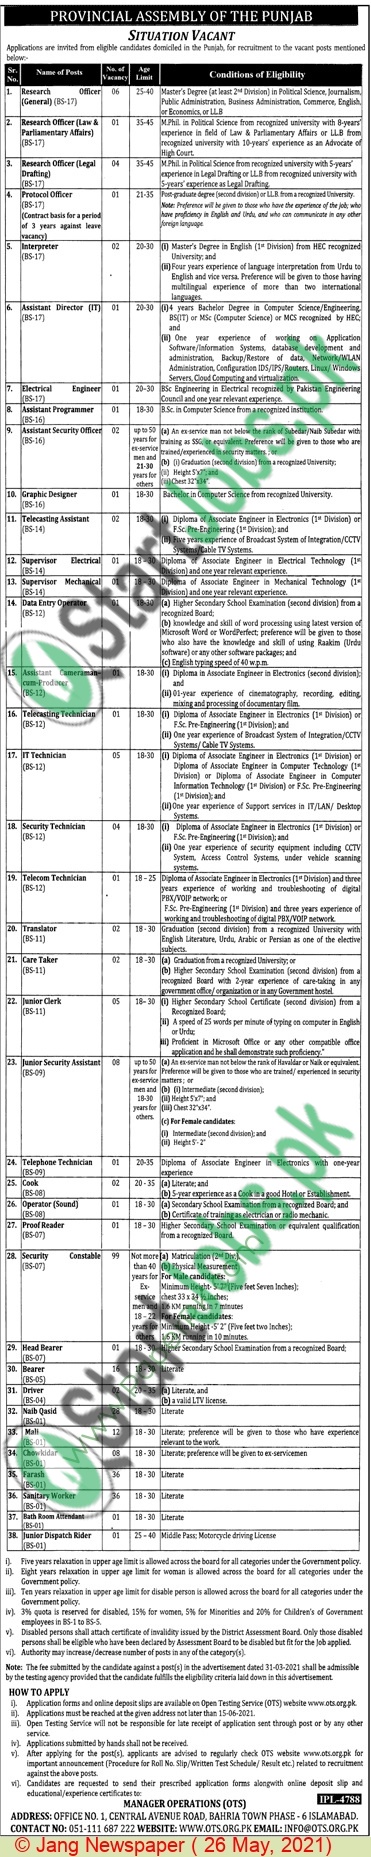 Provincial Assembly of Punjab Jobs 2021